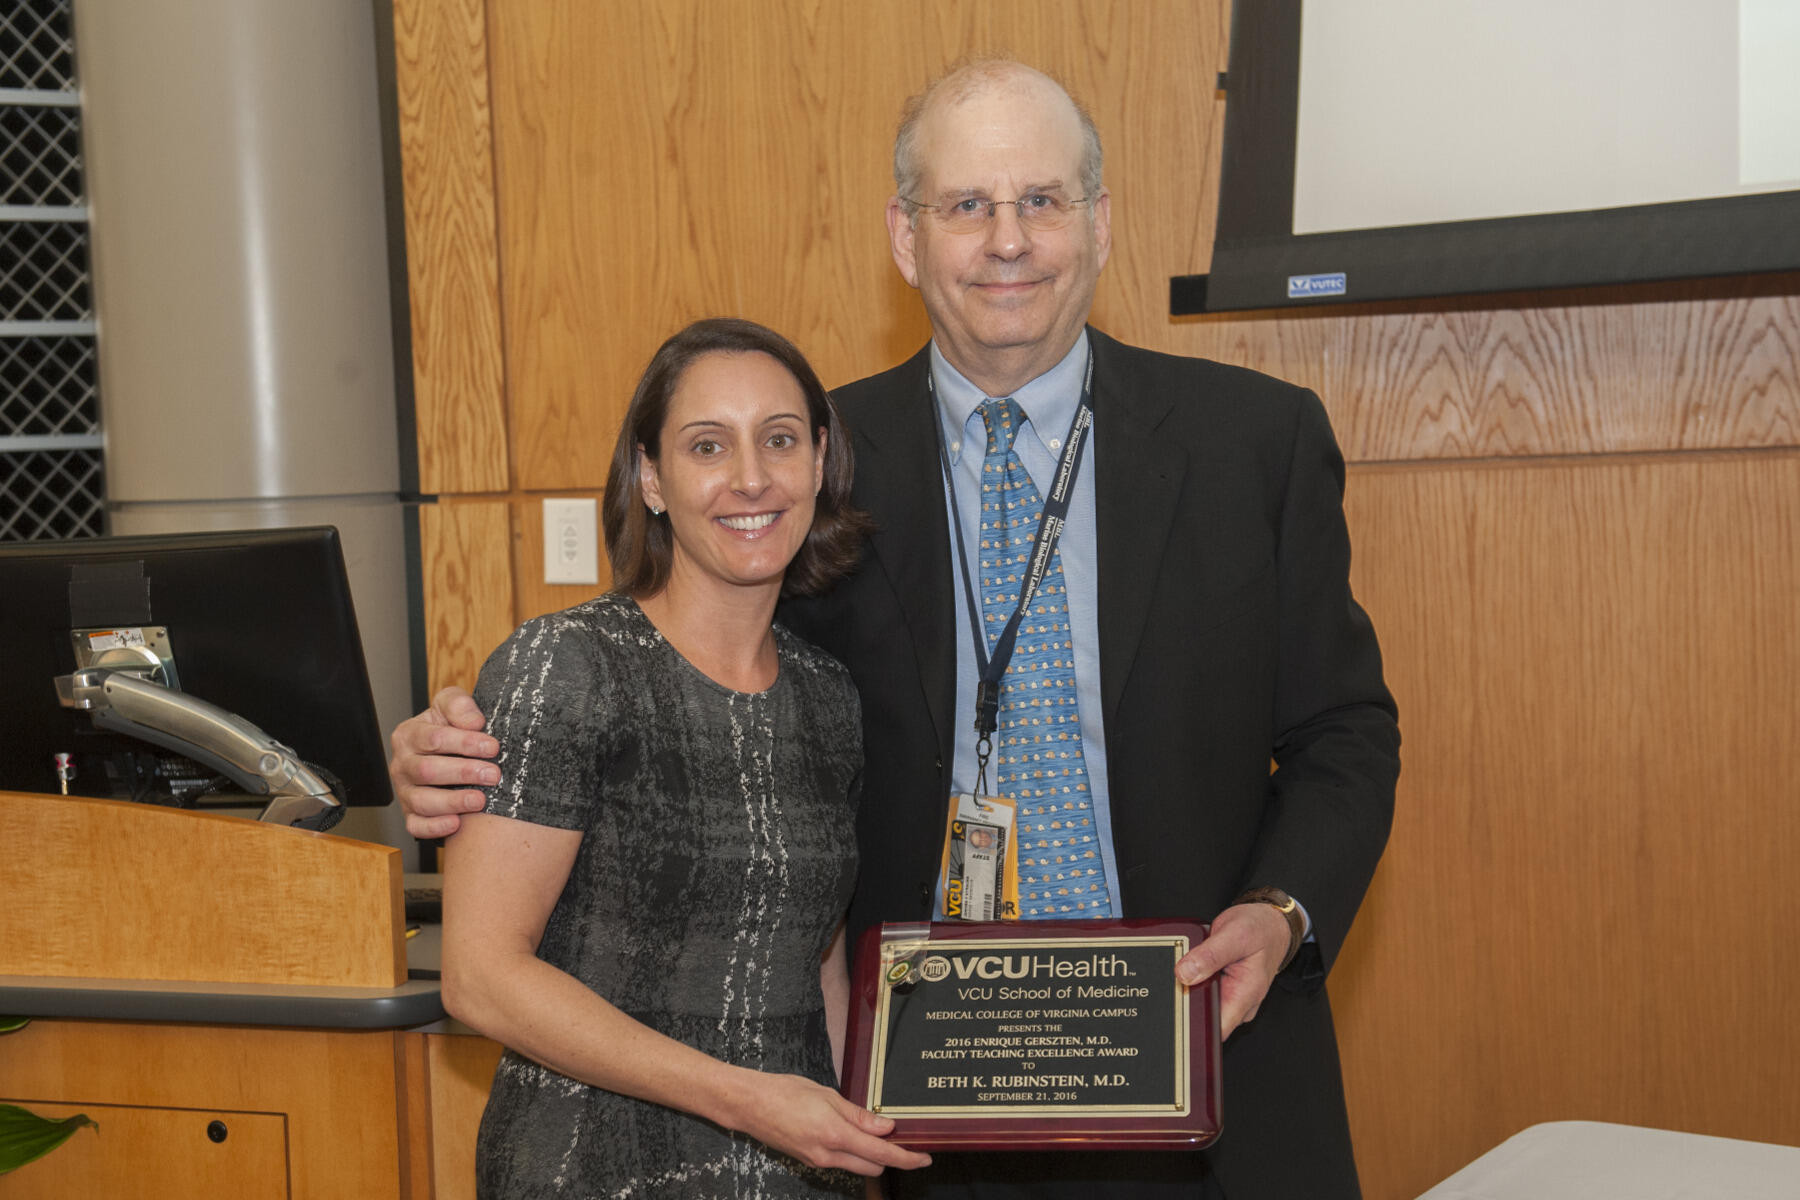 Beth K. Rubinstein (left), M.D., associate professor in the Department of Internal Medicine, was this year’s recipient of the Enrique Gerszten Faculty Teaching Excellence Award, the VCU School of Medicine’s highest recognition for teaching. Jerome Strauss (right), M.D., Ph.D., dean of VCU School of Medicine, presented the award.